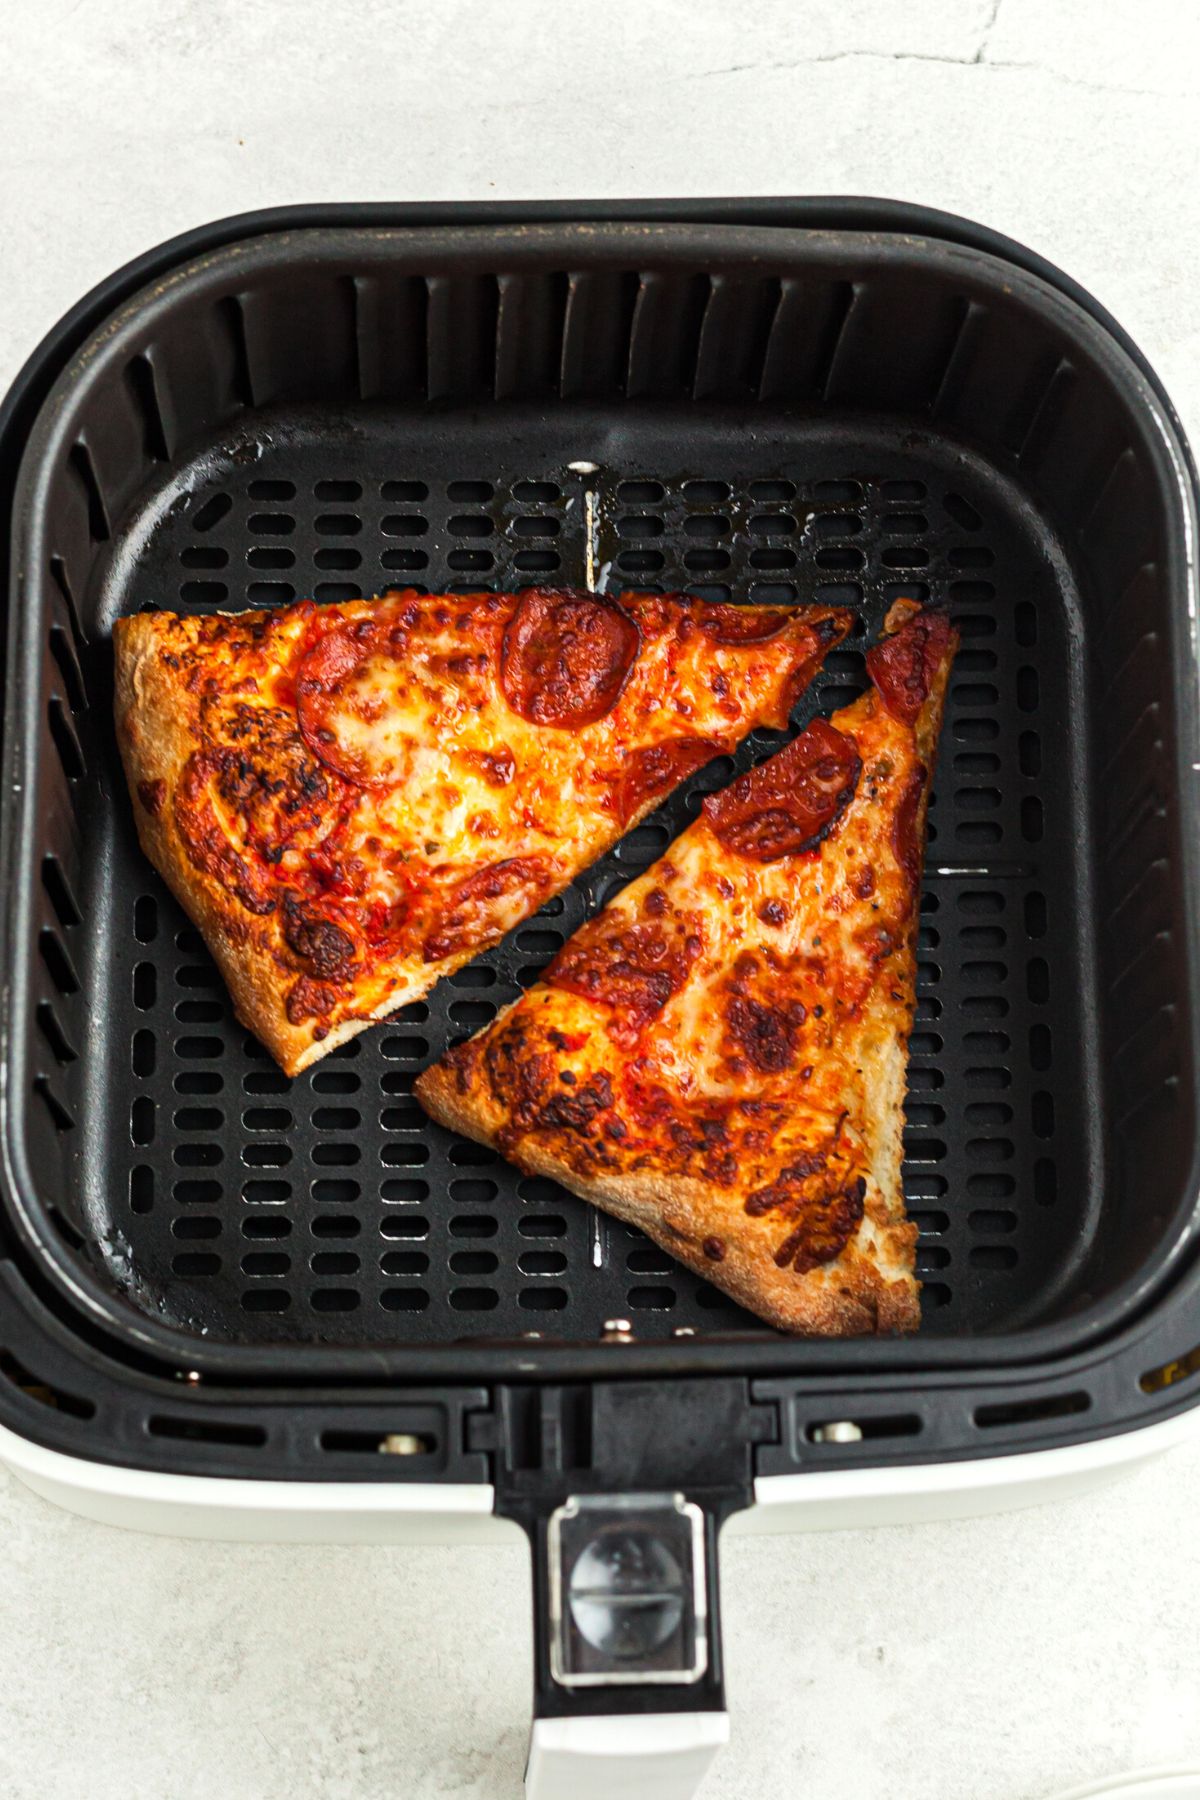 Crispy cooked pizza in the air fryer basket